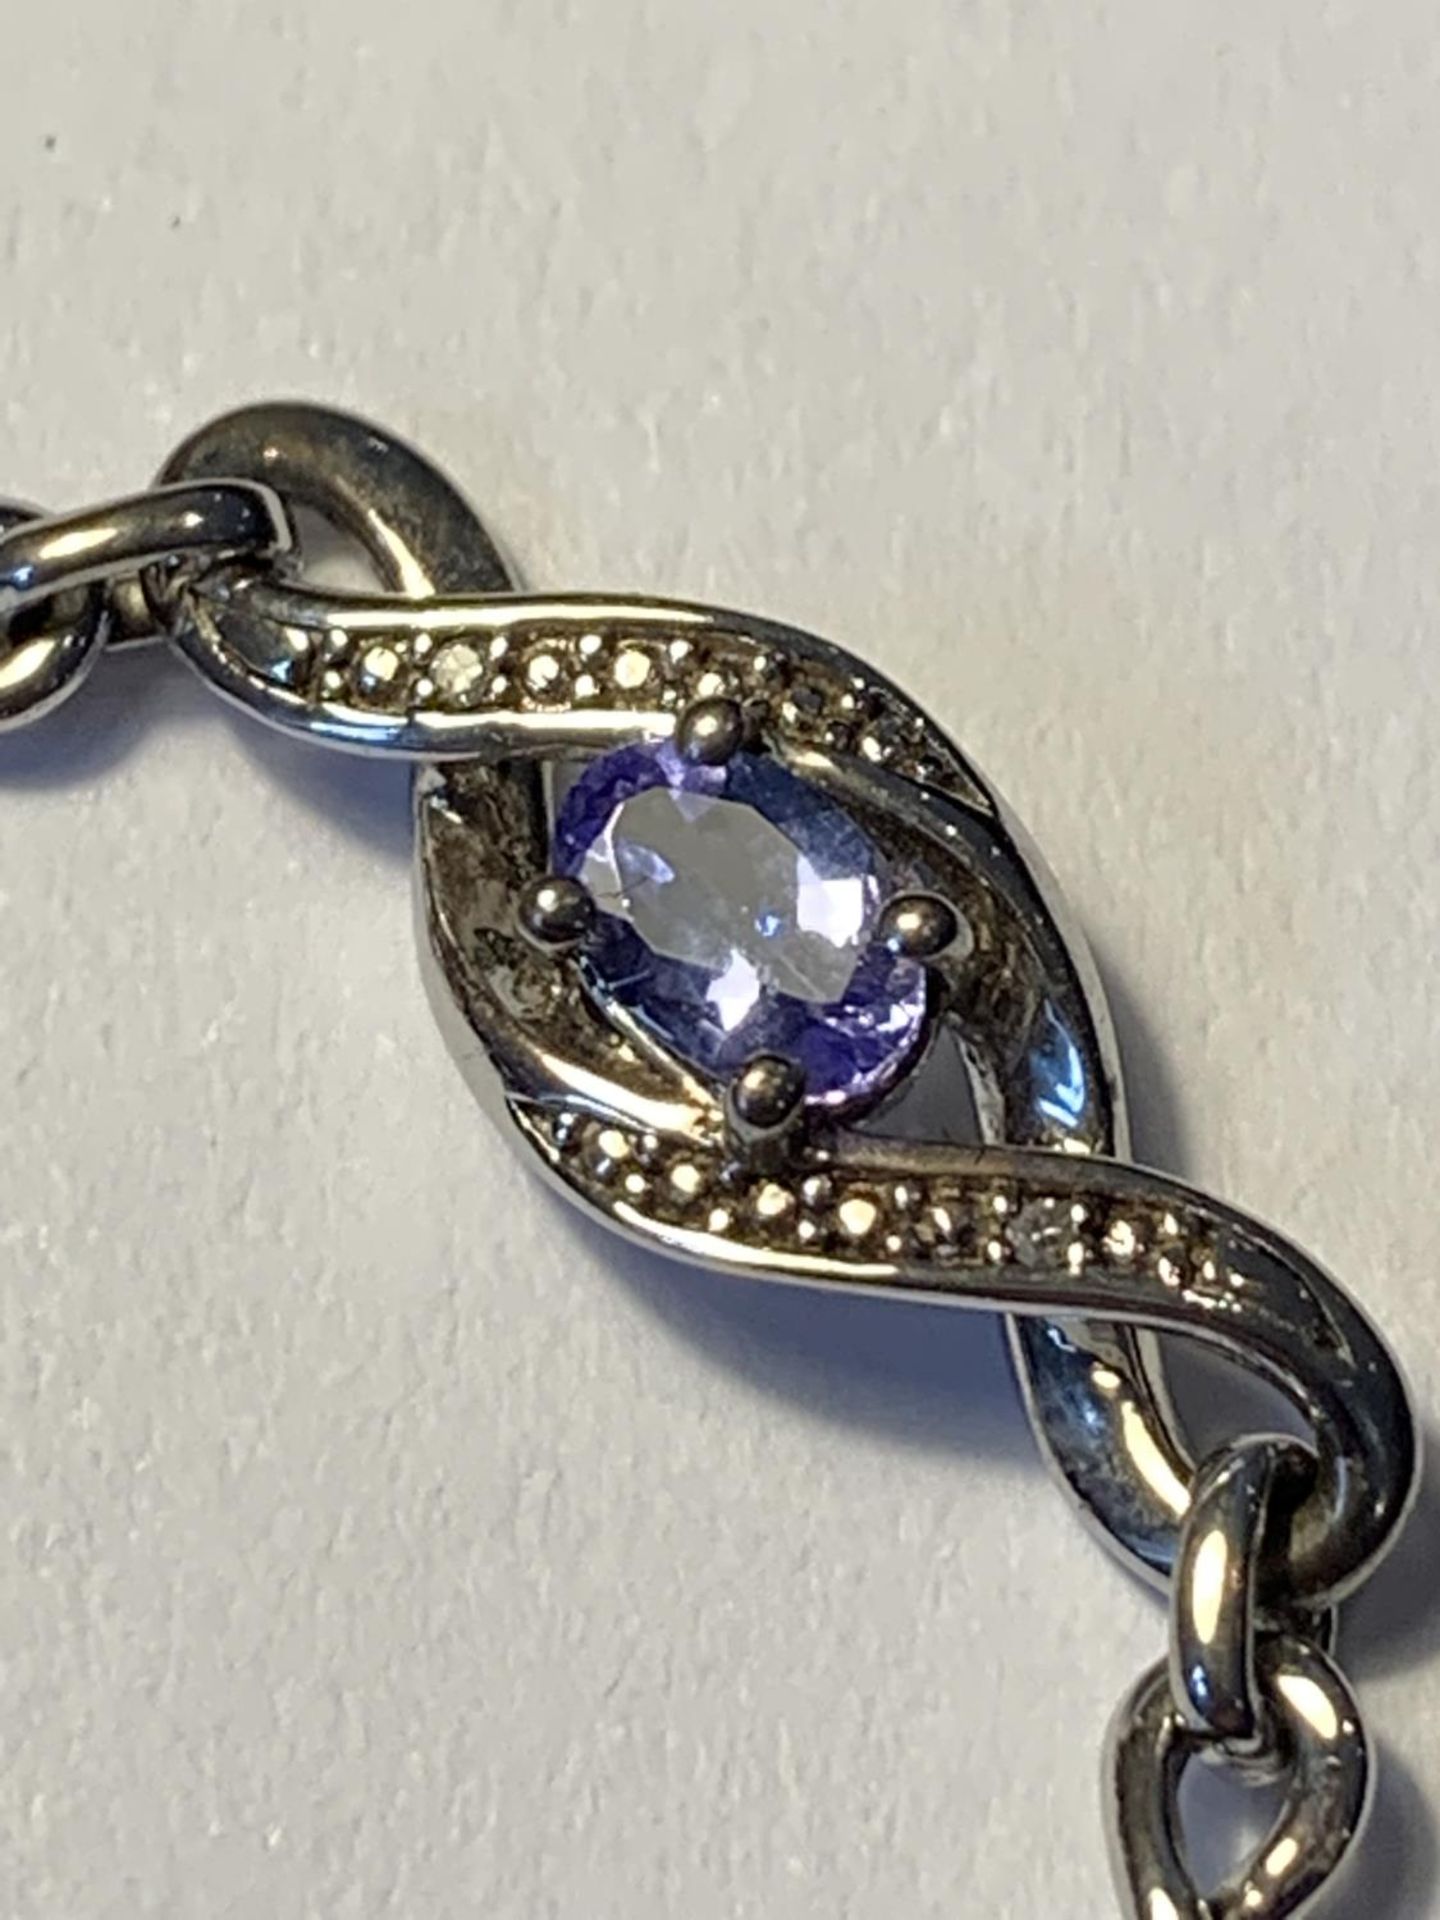 A SILVER BRACELET WITH POSSIBLY AQUAMARINES AND DIAMOND CHIPS IN A PRESENTATION BOX - Image 2 of 4